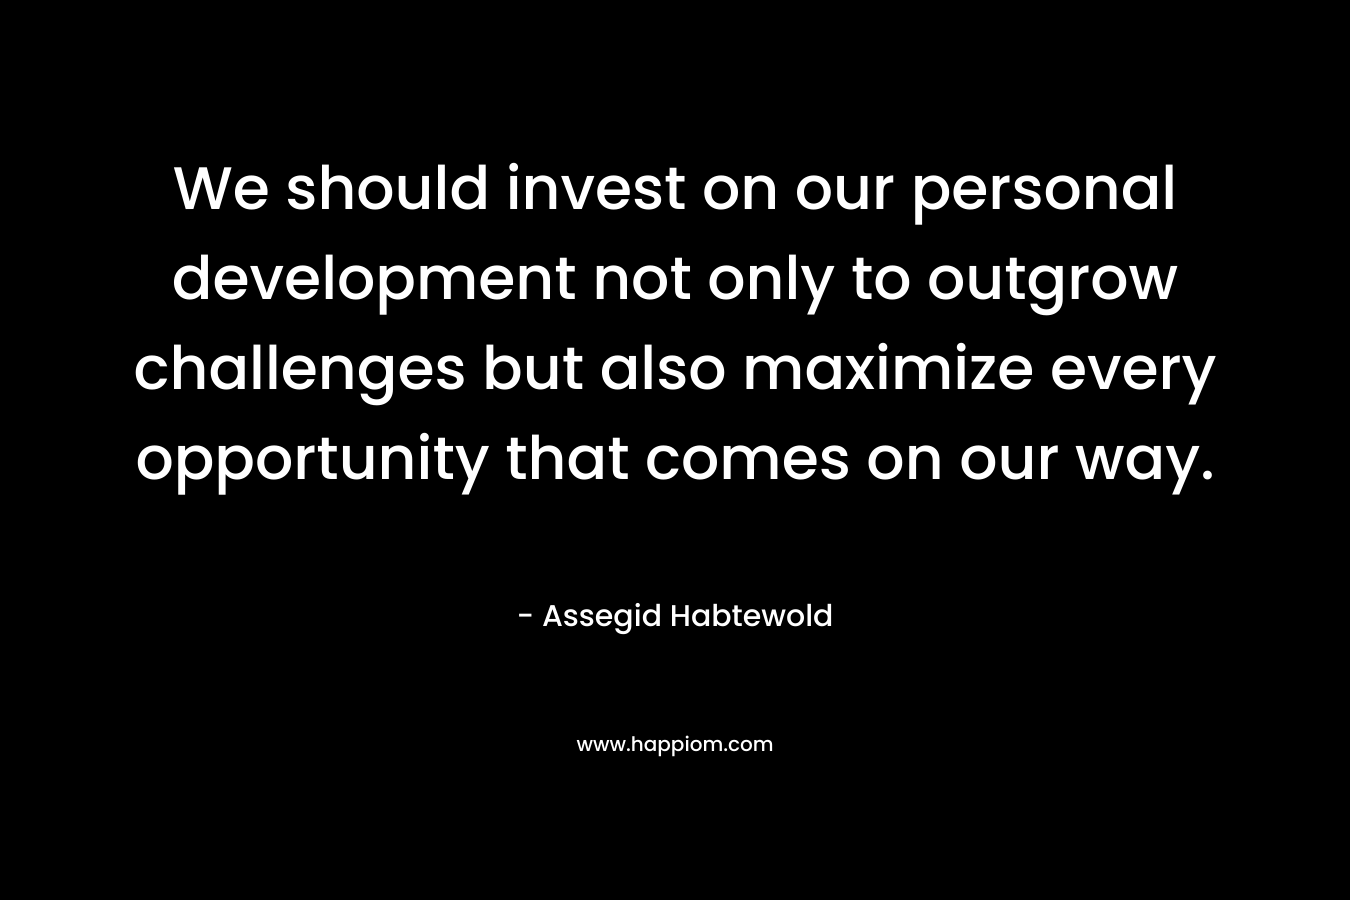 We should invest on our personal development not only to outgrow challenges but also maximize every opportunity that comes on our way. – Assegid Habtewold